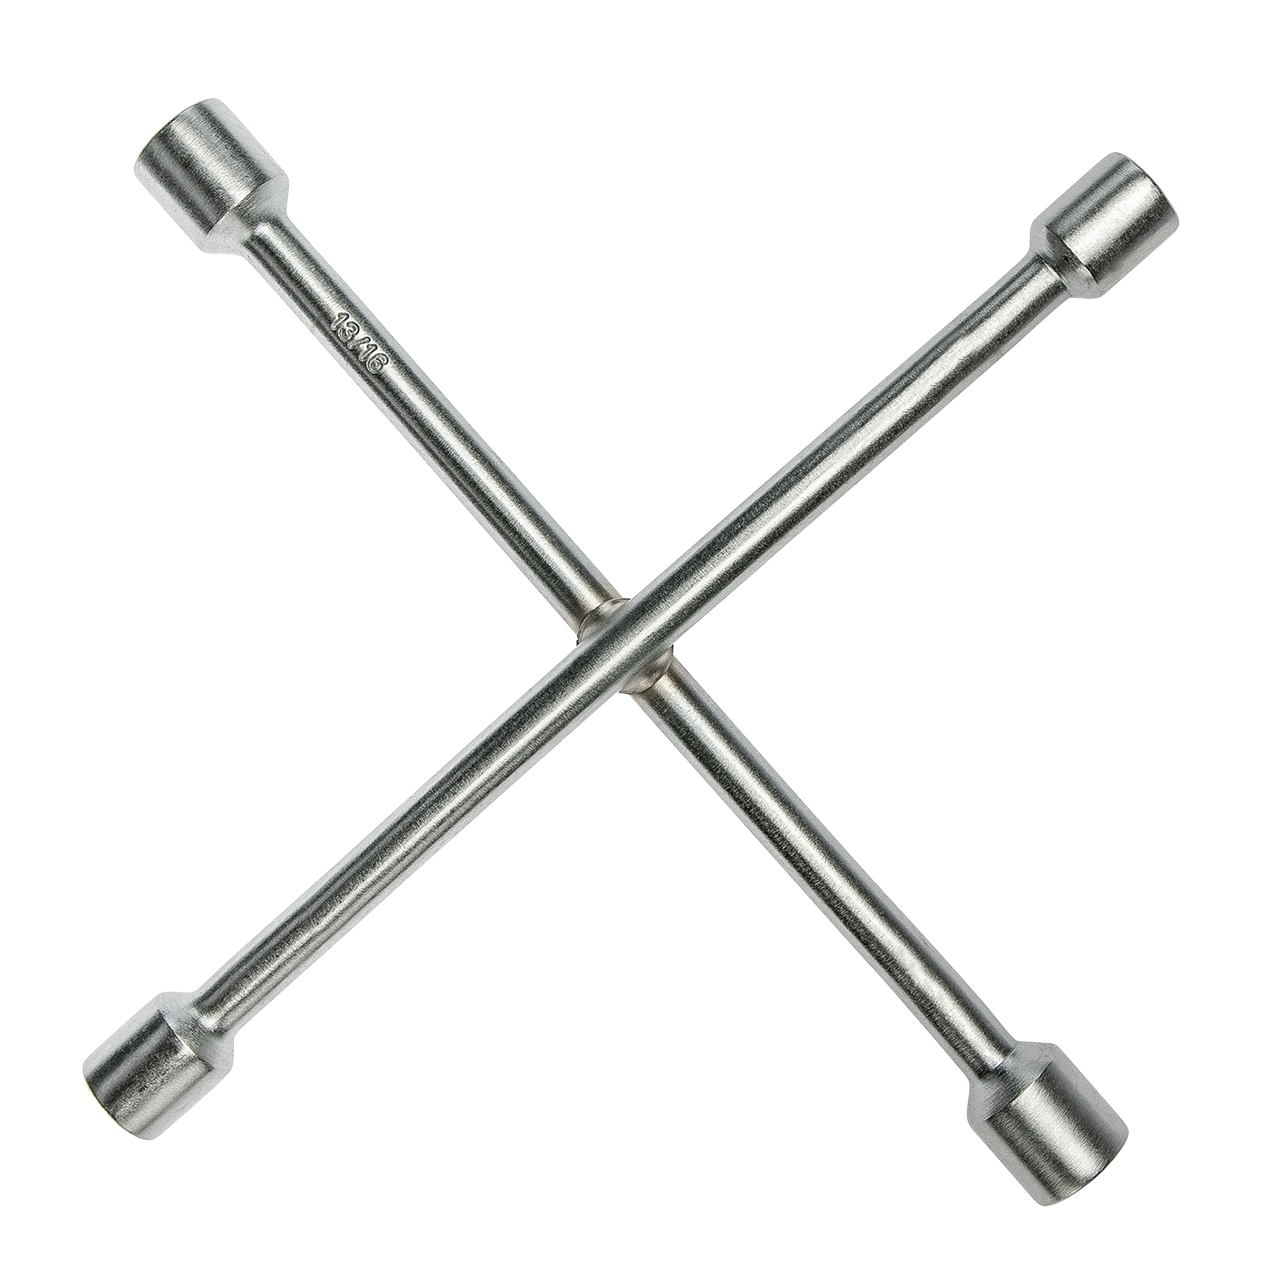 4-Way Wheel Wrench for cars